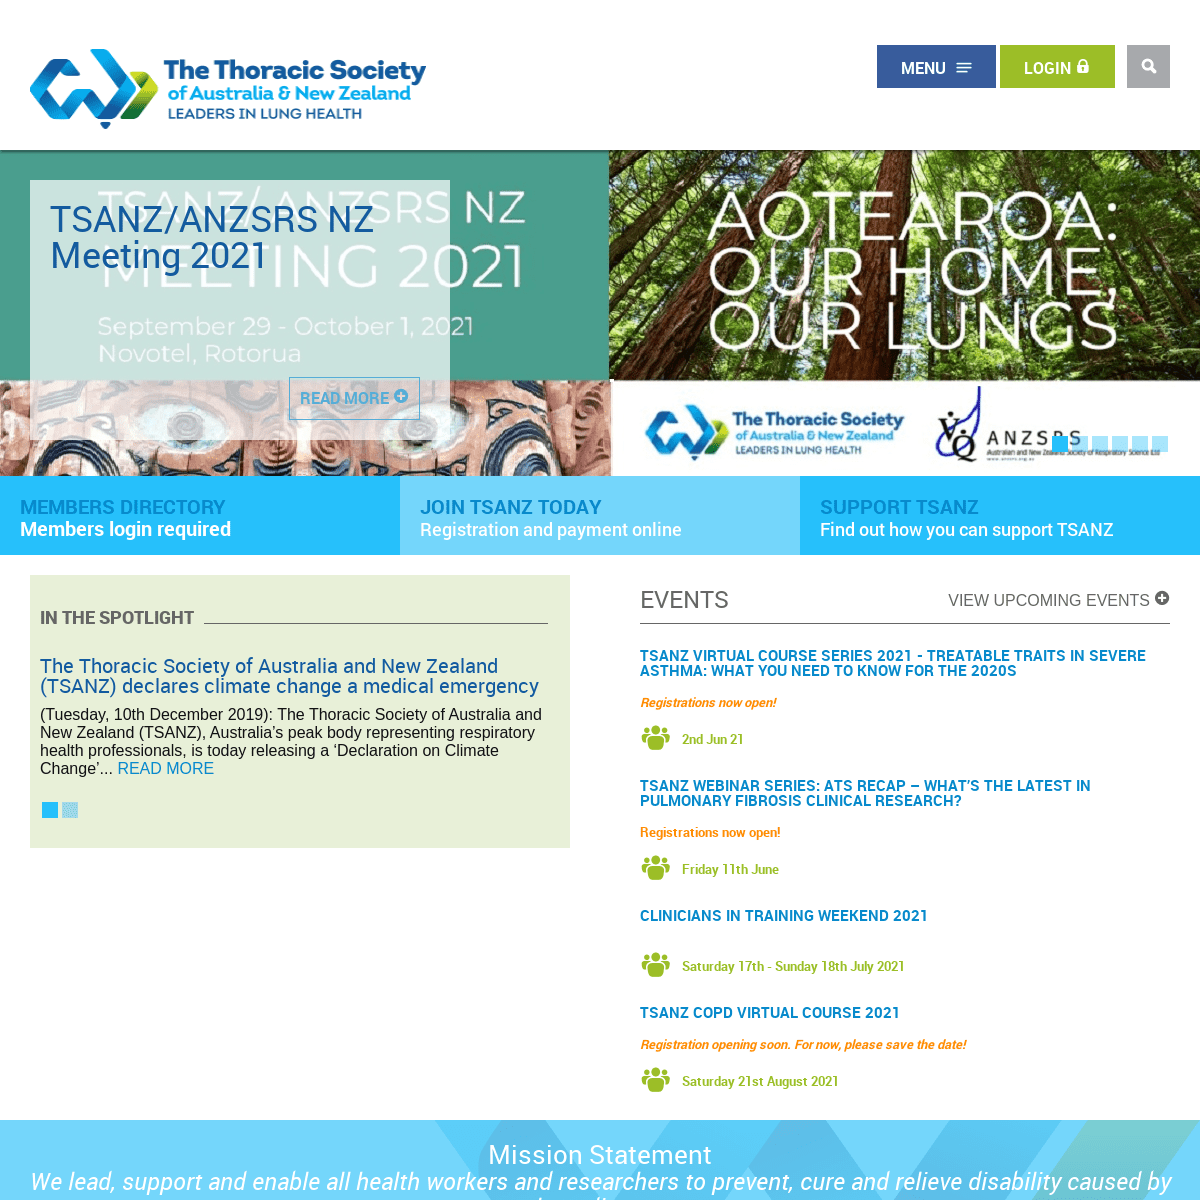 A complete backup of https://thoracic.org.au